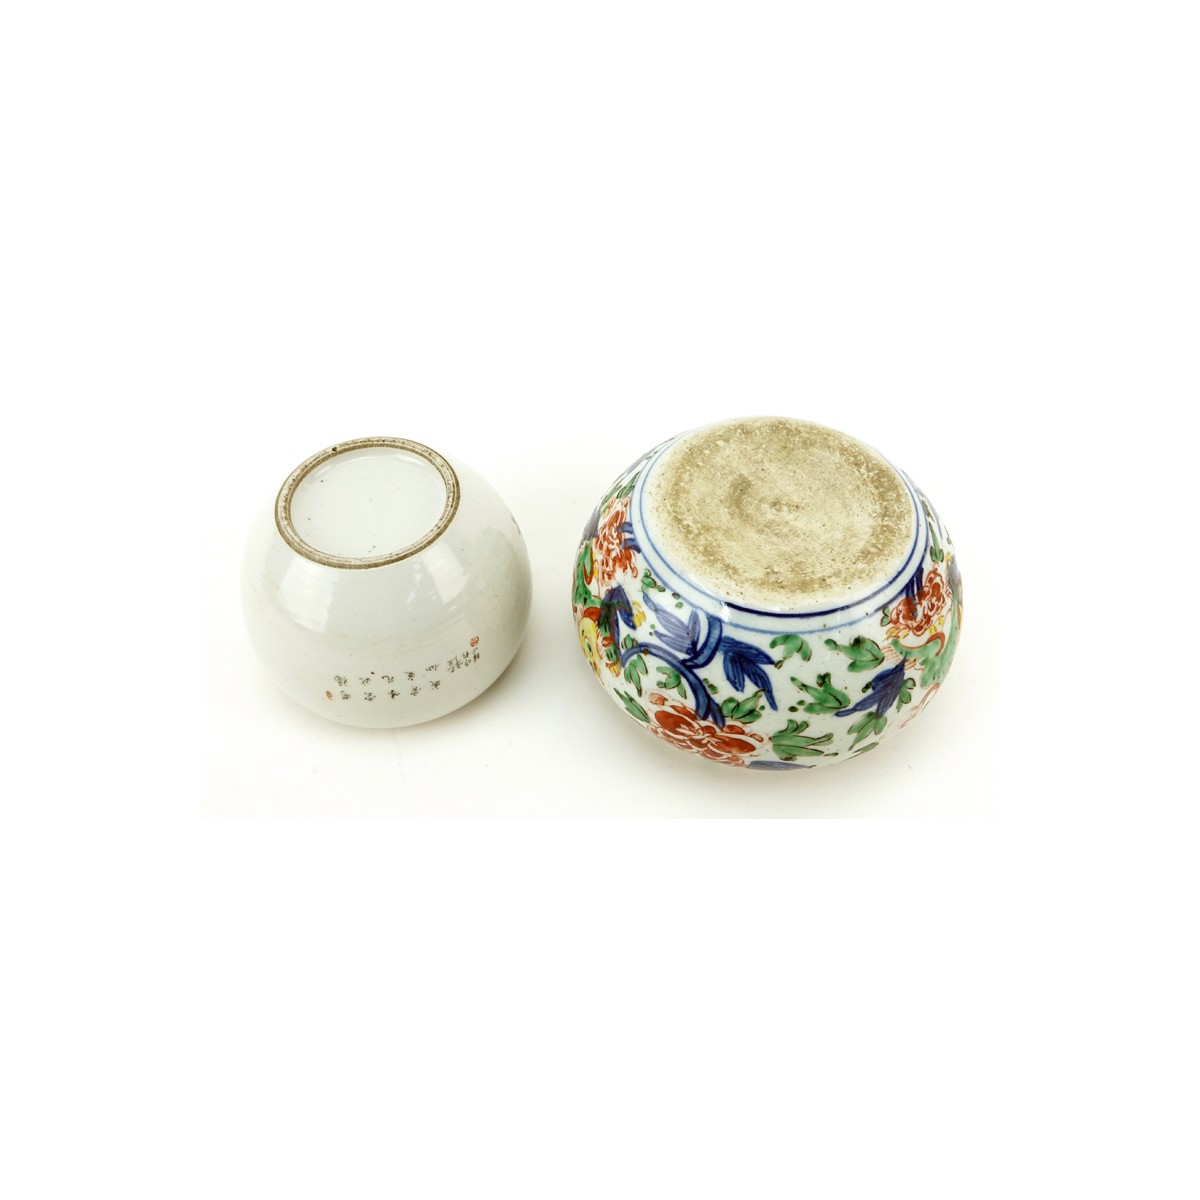 Grouping of Two (2) Chinese Porcelain Tableware. Includes: Wucai style jar and jar with pomegranate